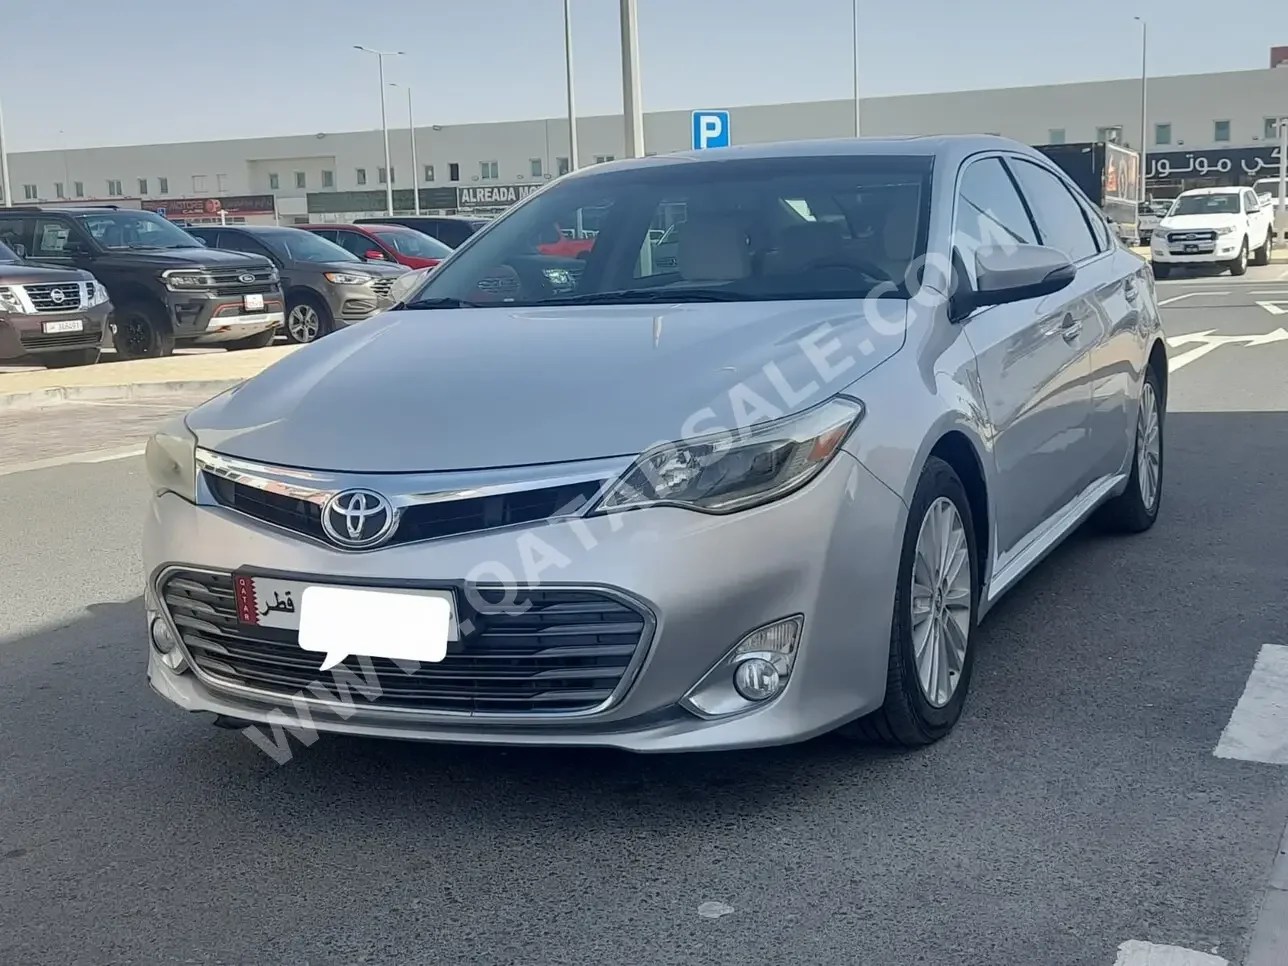 Toyota  Avalon  Limited  2014  Automatic  208,000 Km  6 Cylinder  Front Wheel Drive (FWD)  Sedan  Silver